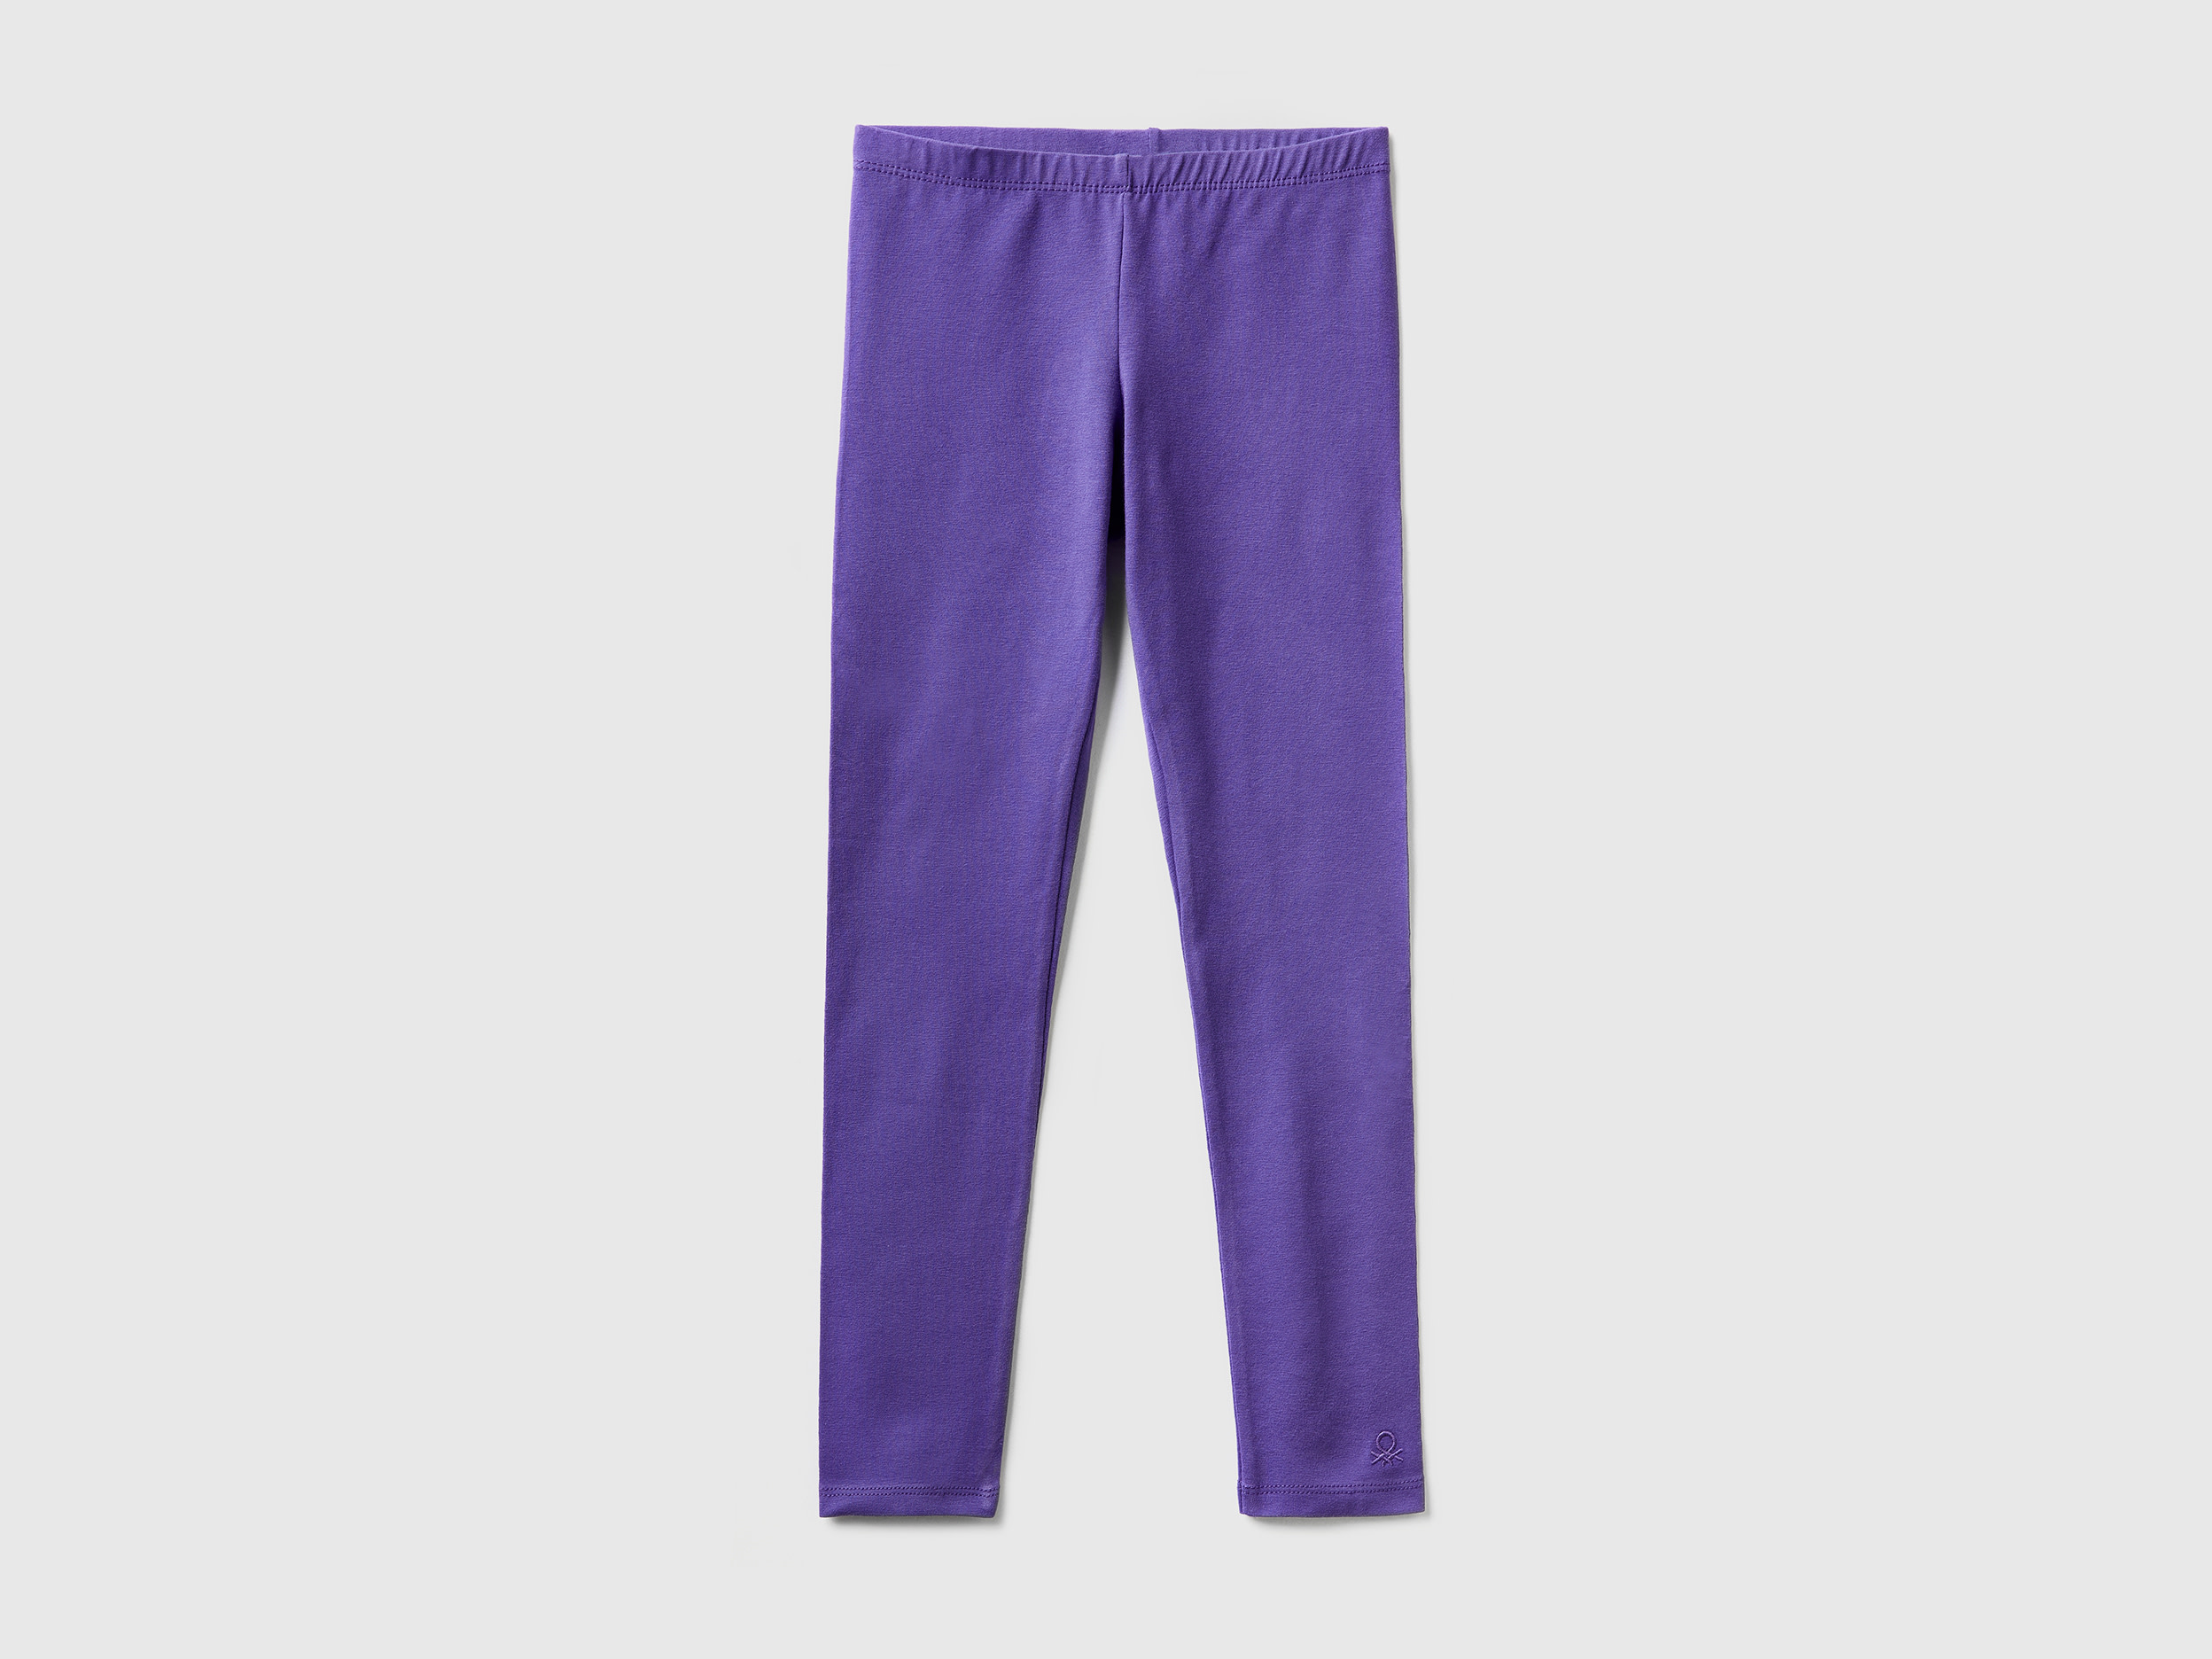 Benetton, Leggings In Stretch Cotton With Logo, size 3XL, Violet, Kids